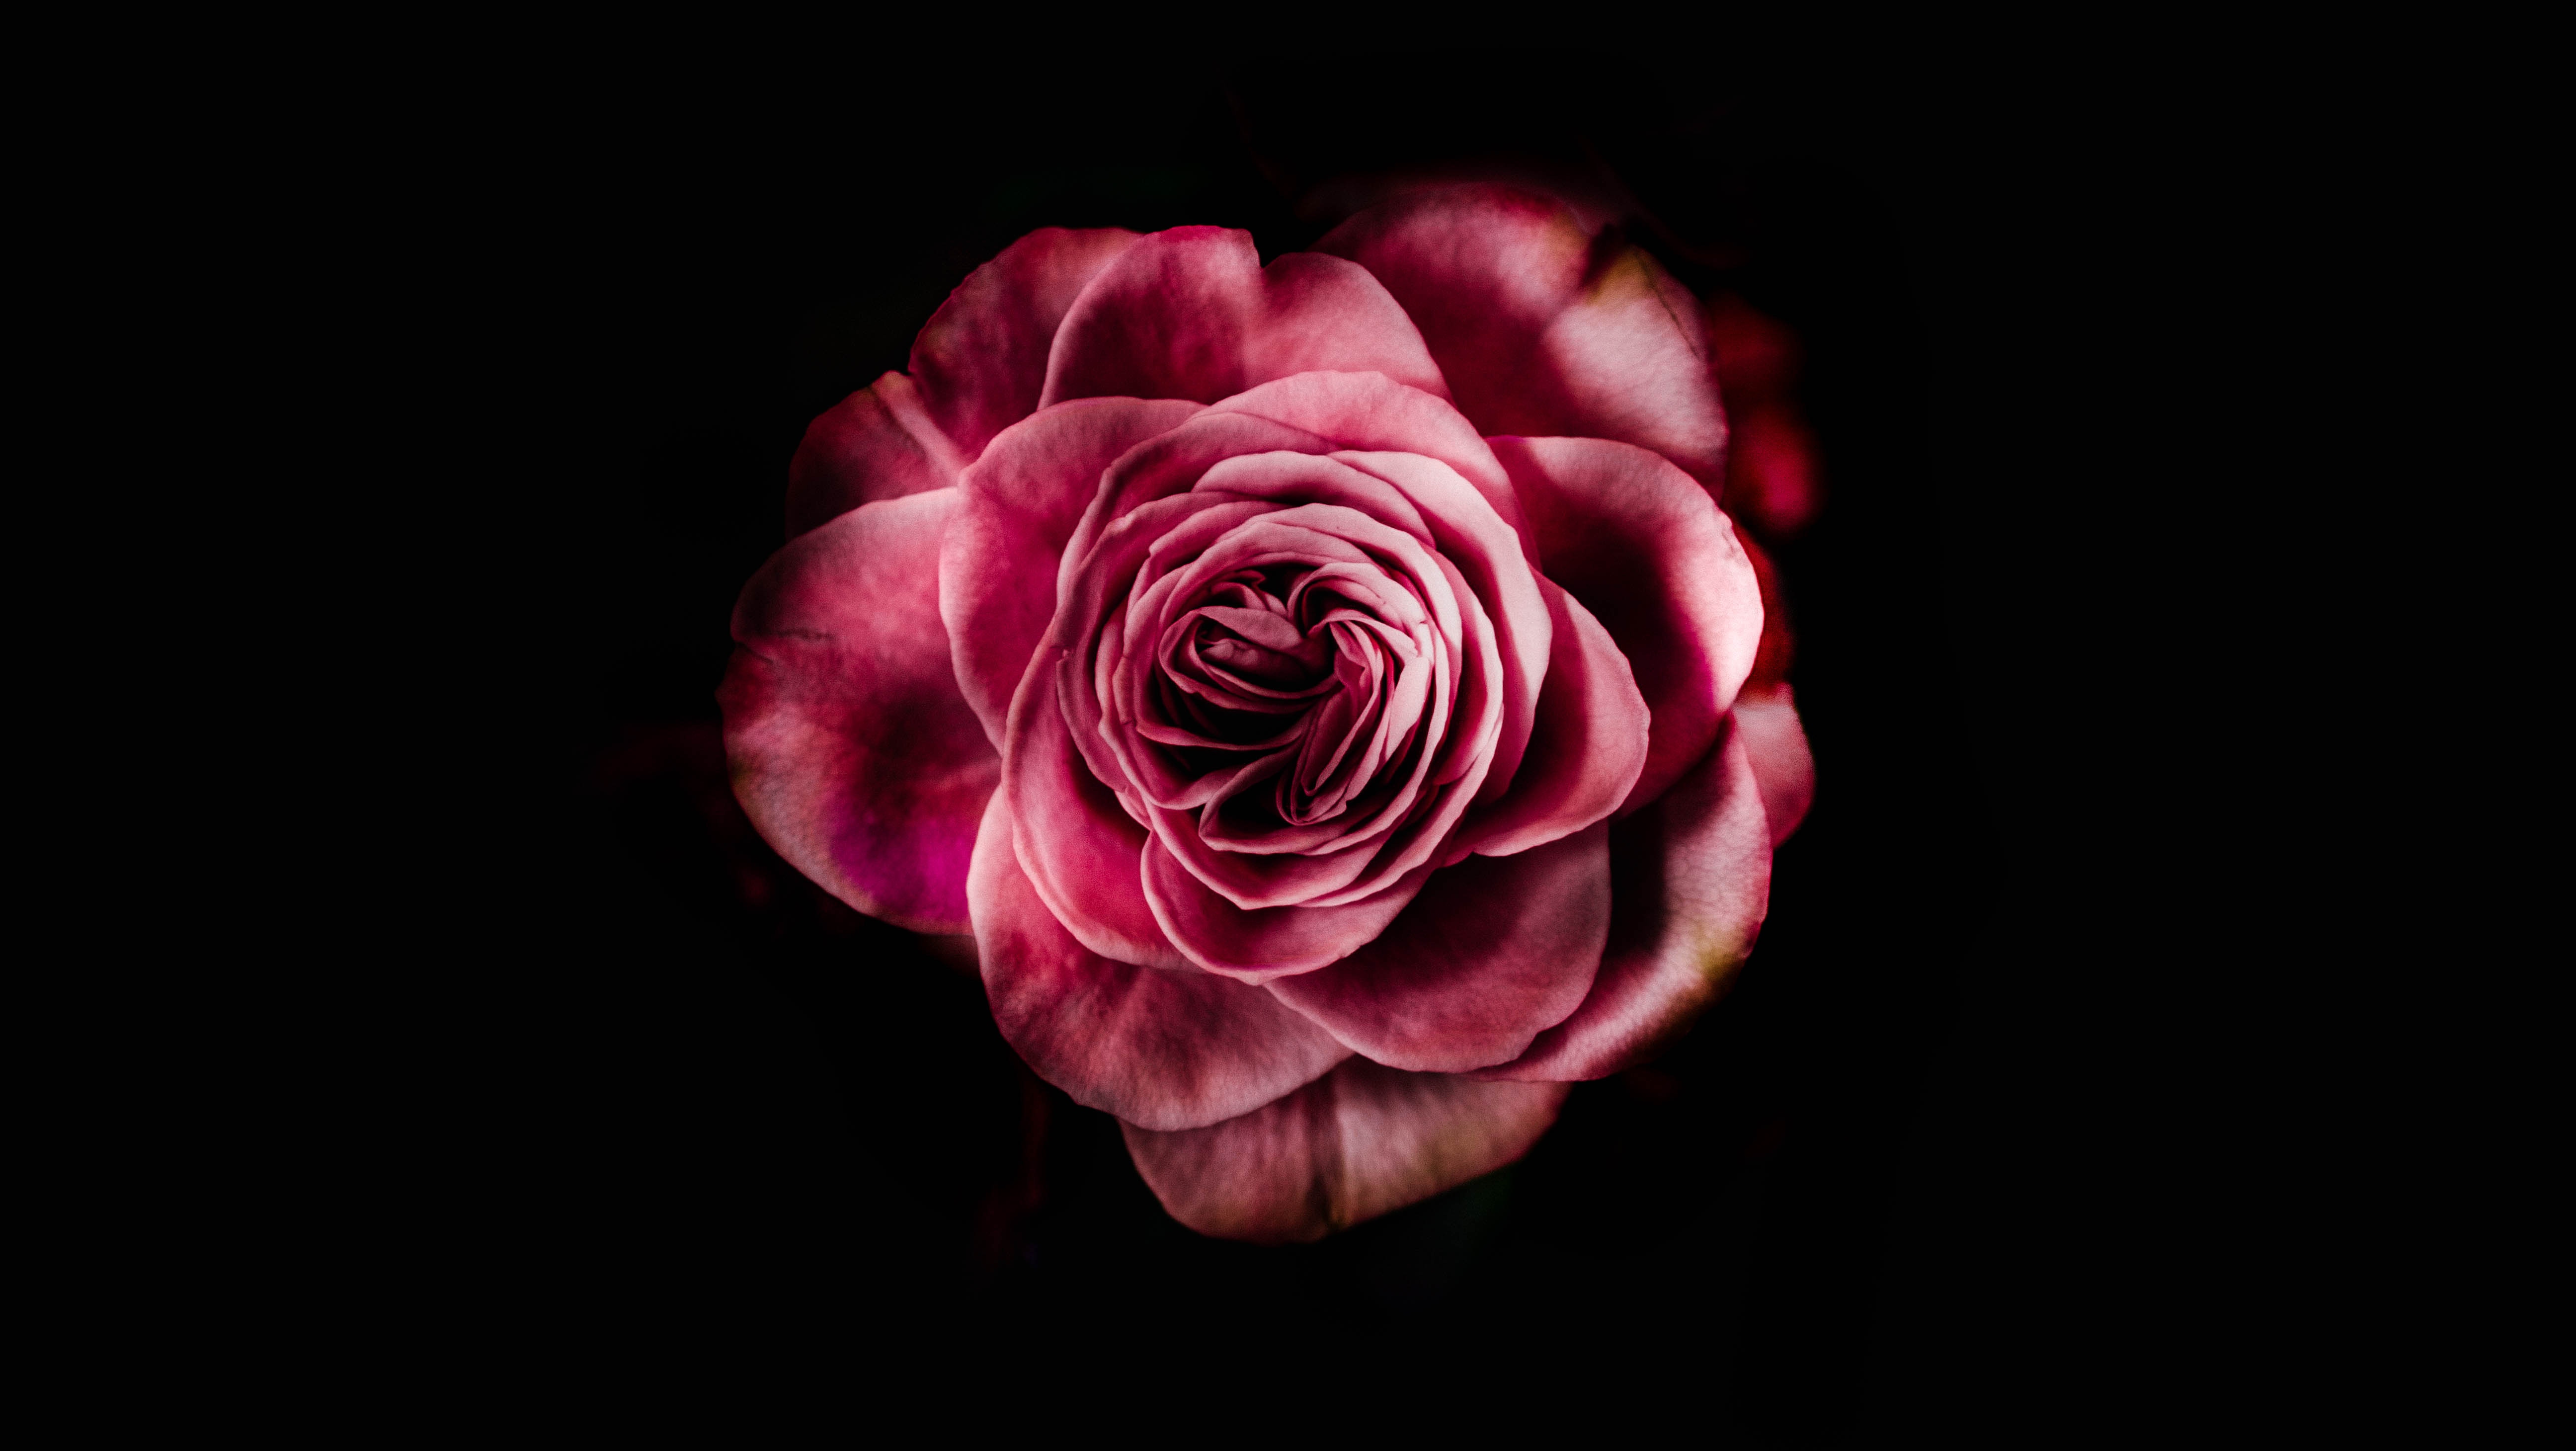 Natural Rose Flower On Background Blurry Pink Roses In The Garden Photo   JPG Free Download  Pikbest